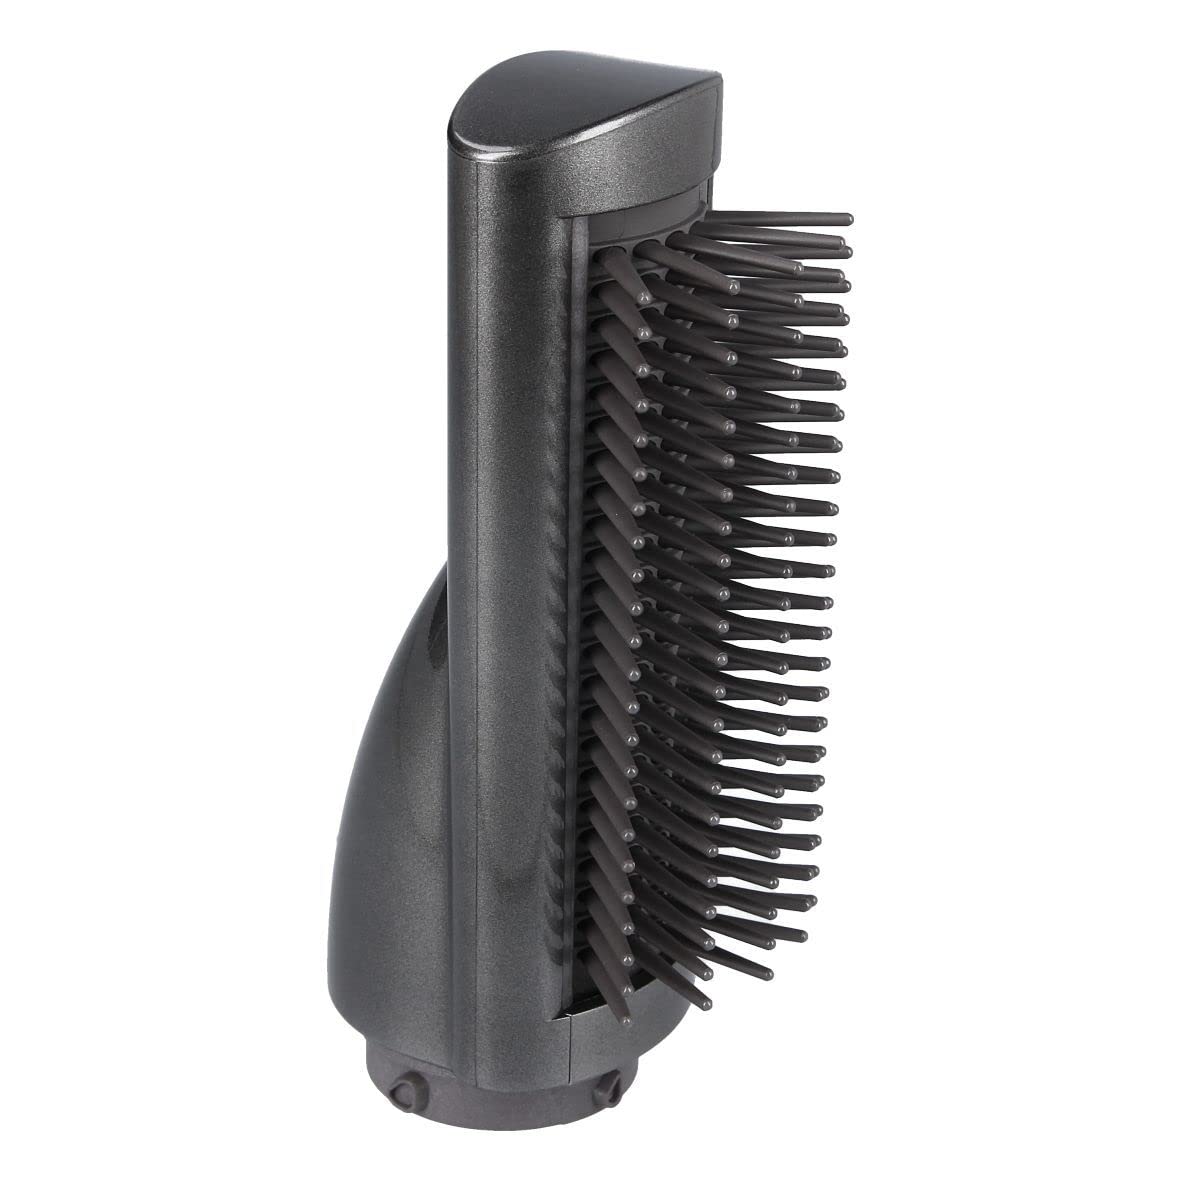 Dysons New Airwrap Wide Tooth Comb Attachment Is for Curly Hair  Allure